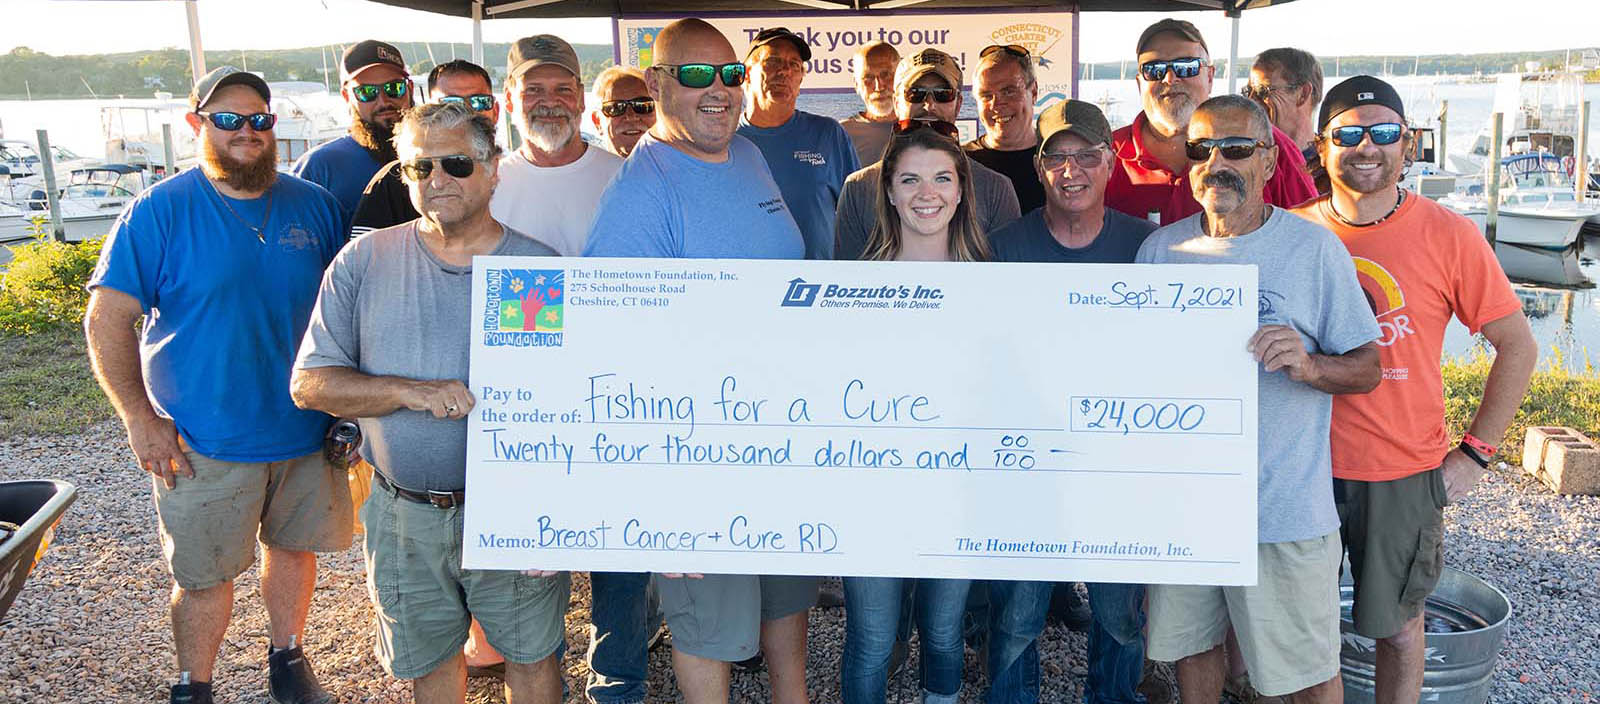 CT Fishing Charters - Proud to Support our Community